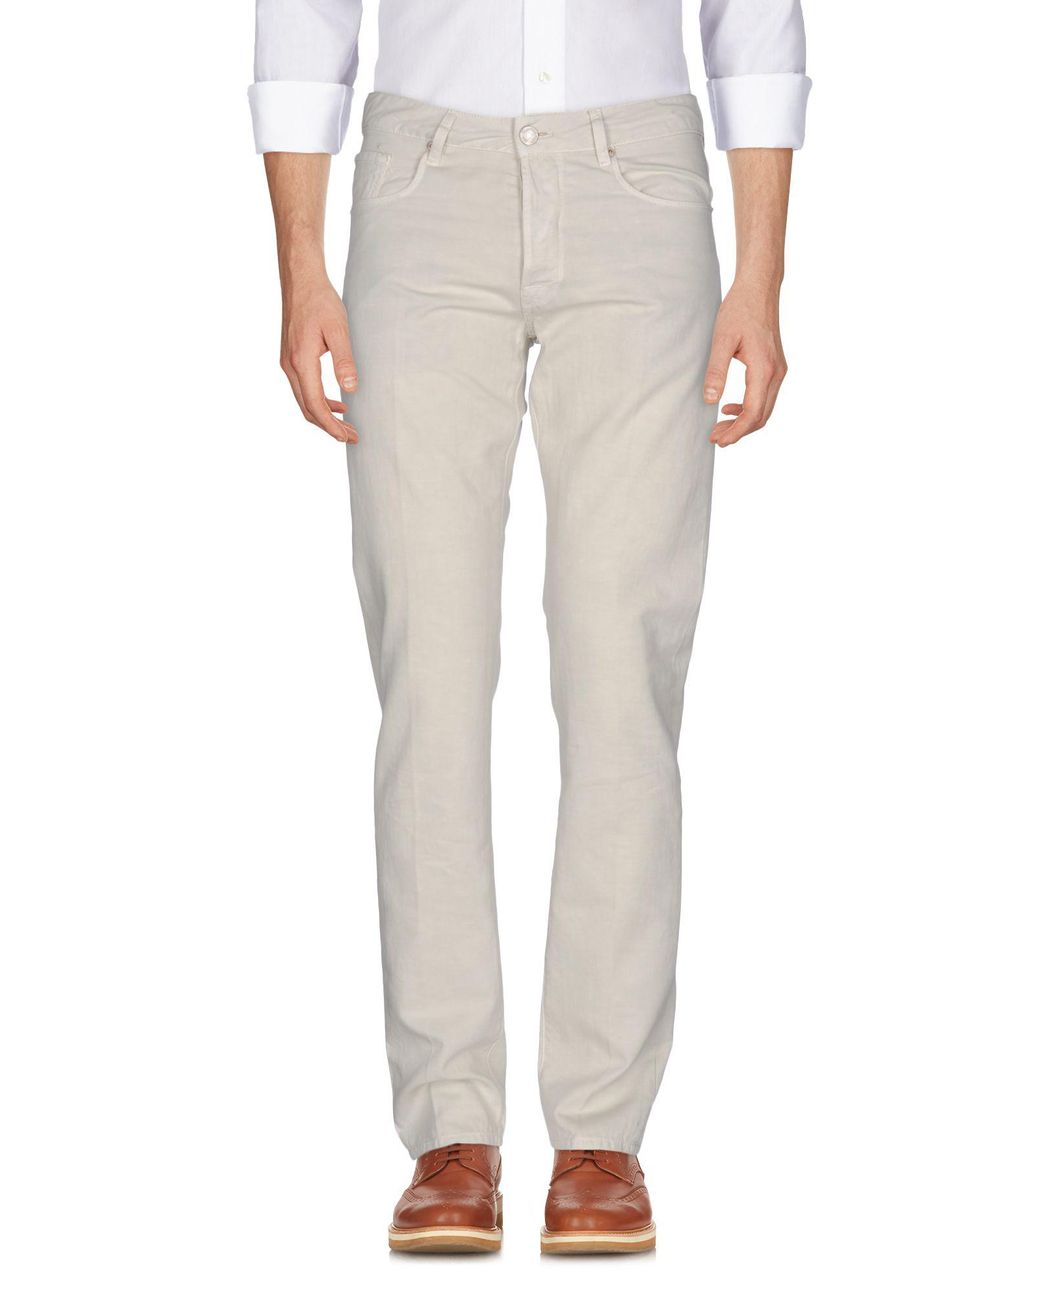 Pt05 Leather Casual Trouser in Ivory (White) for Men - Lyst